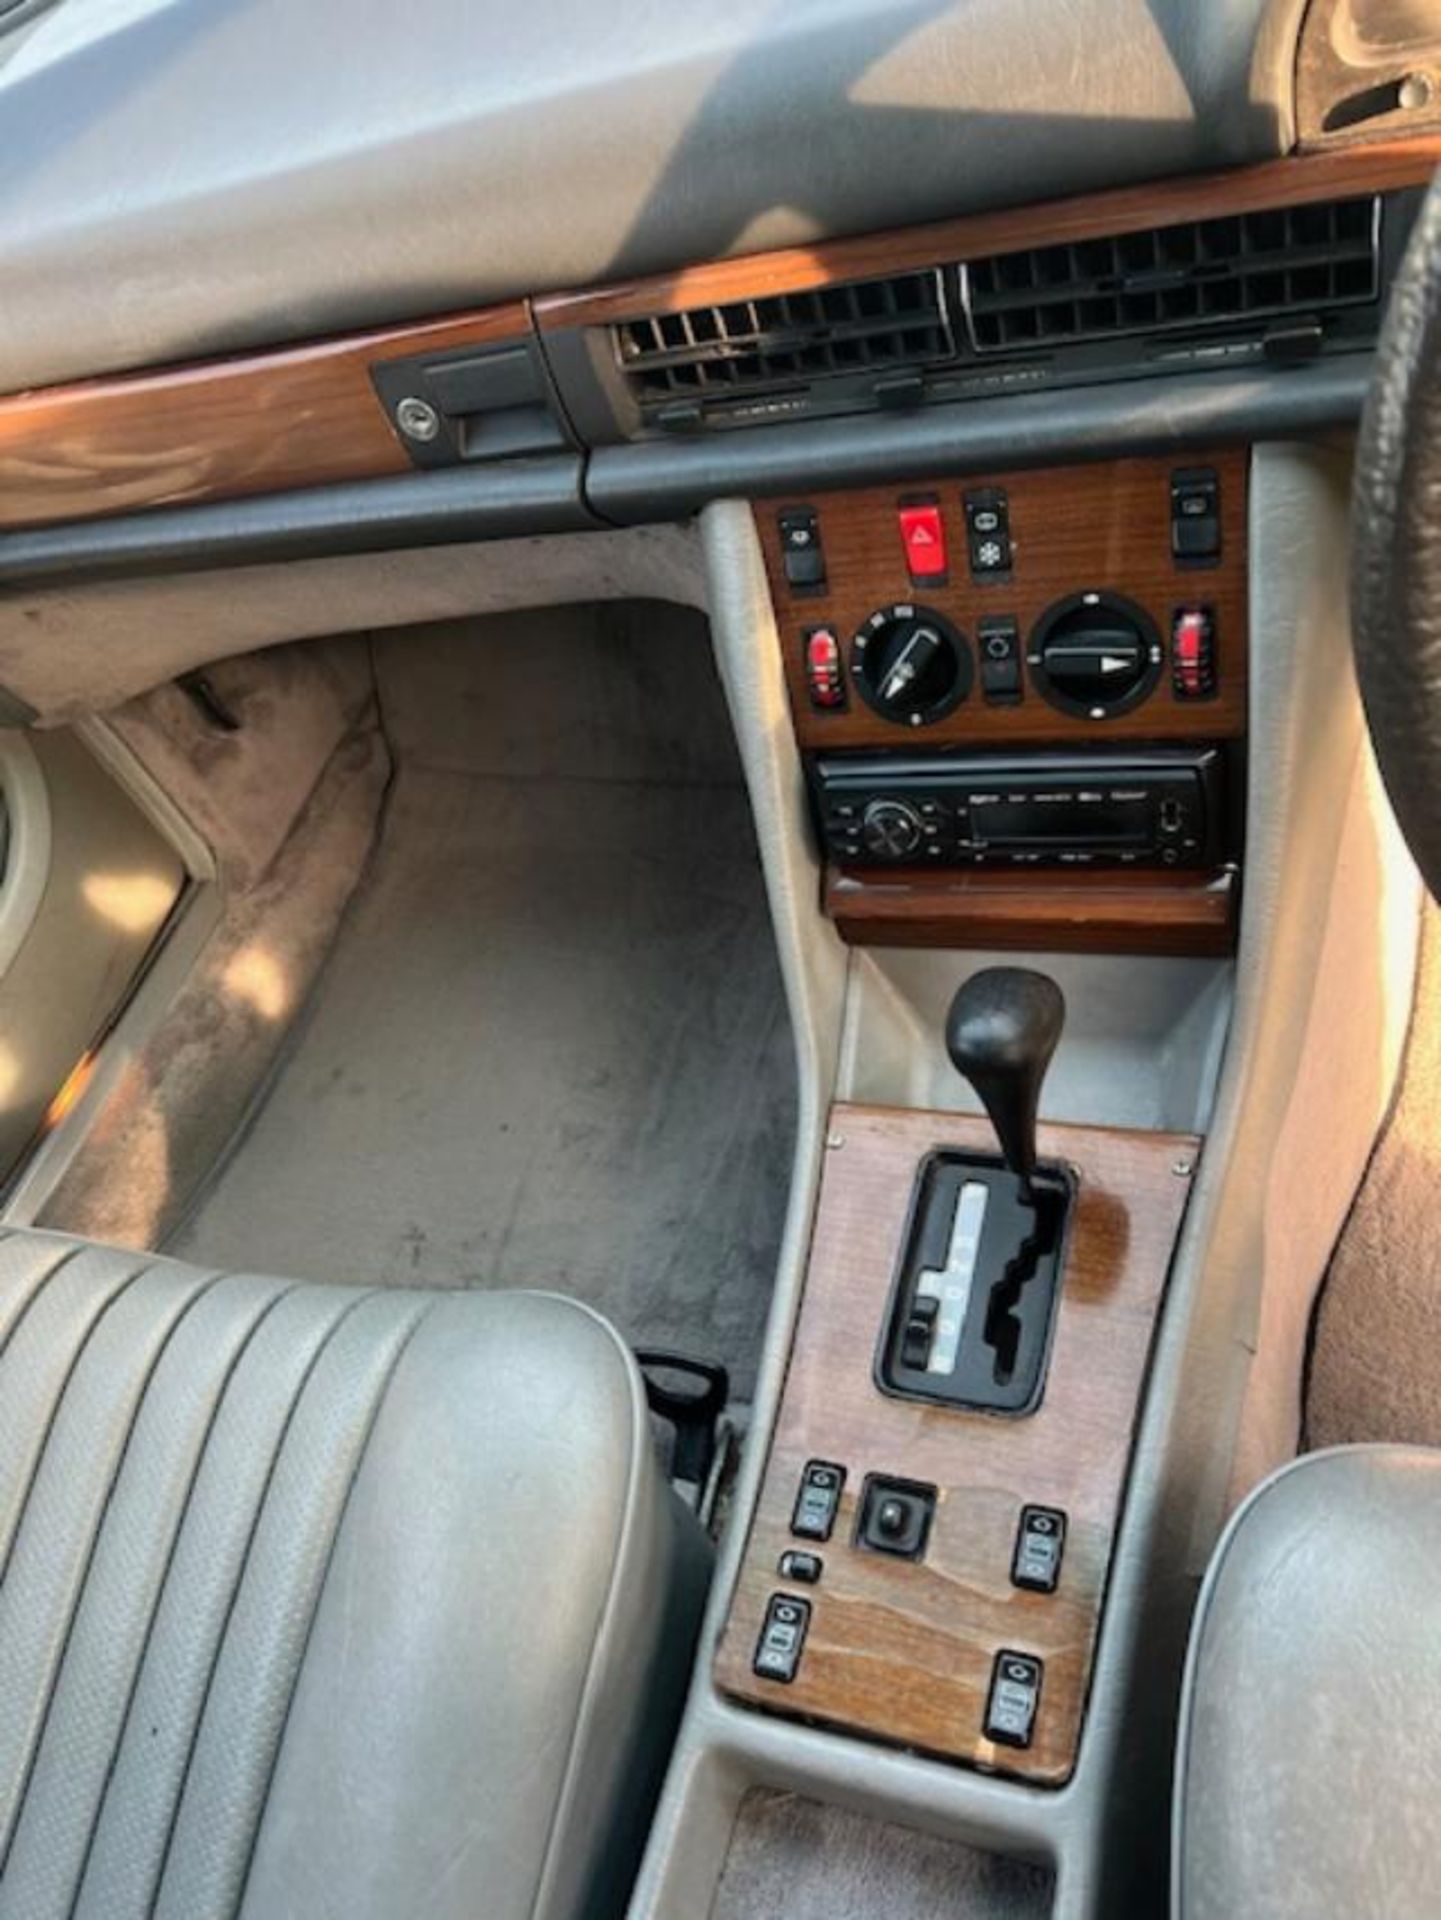 1989 Mercedes S300 SEL - Image 10 of 19